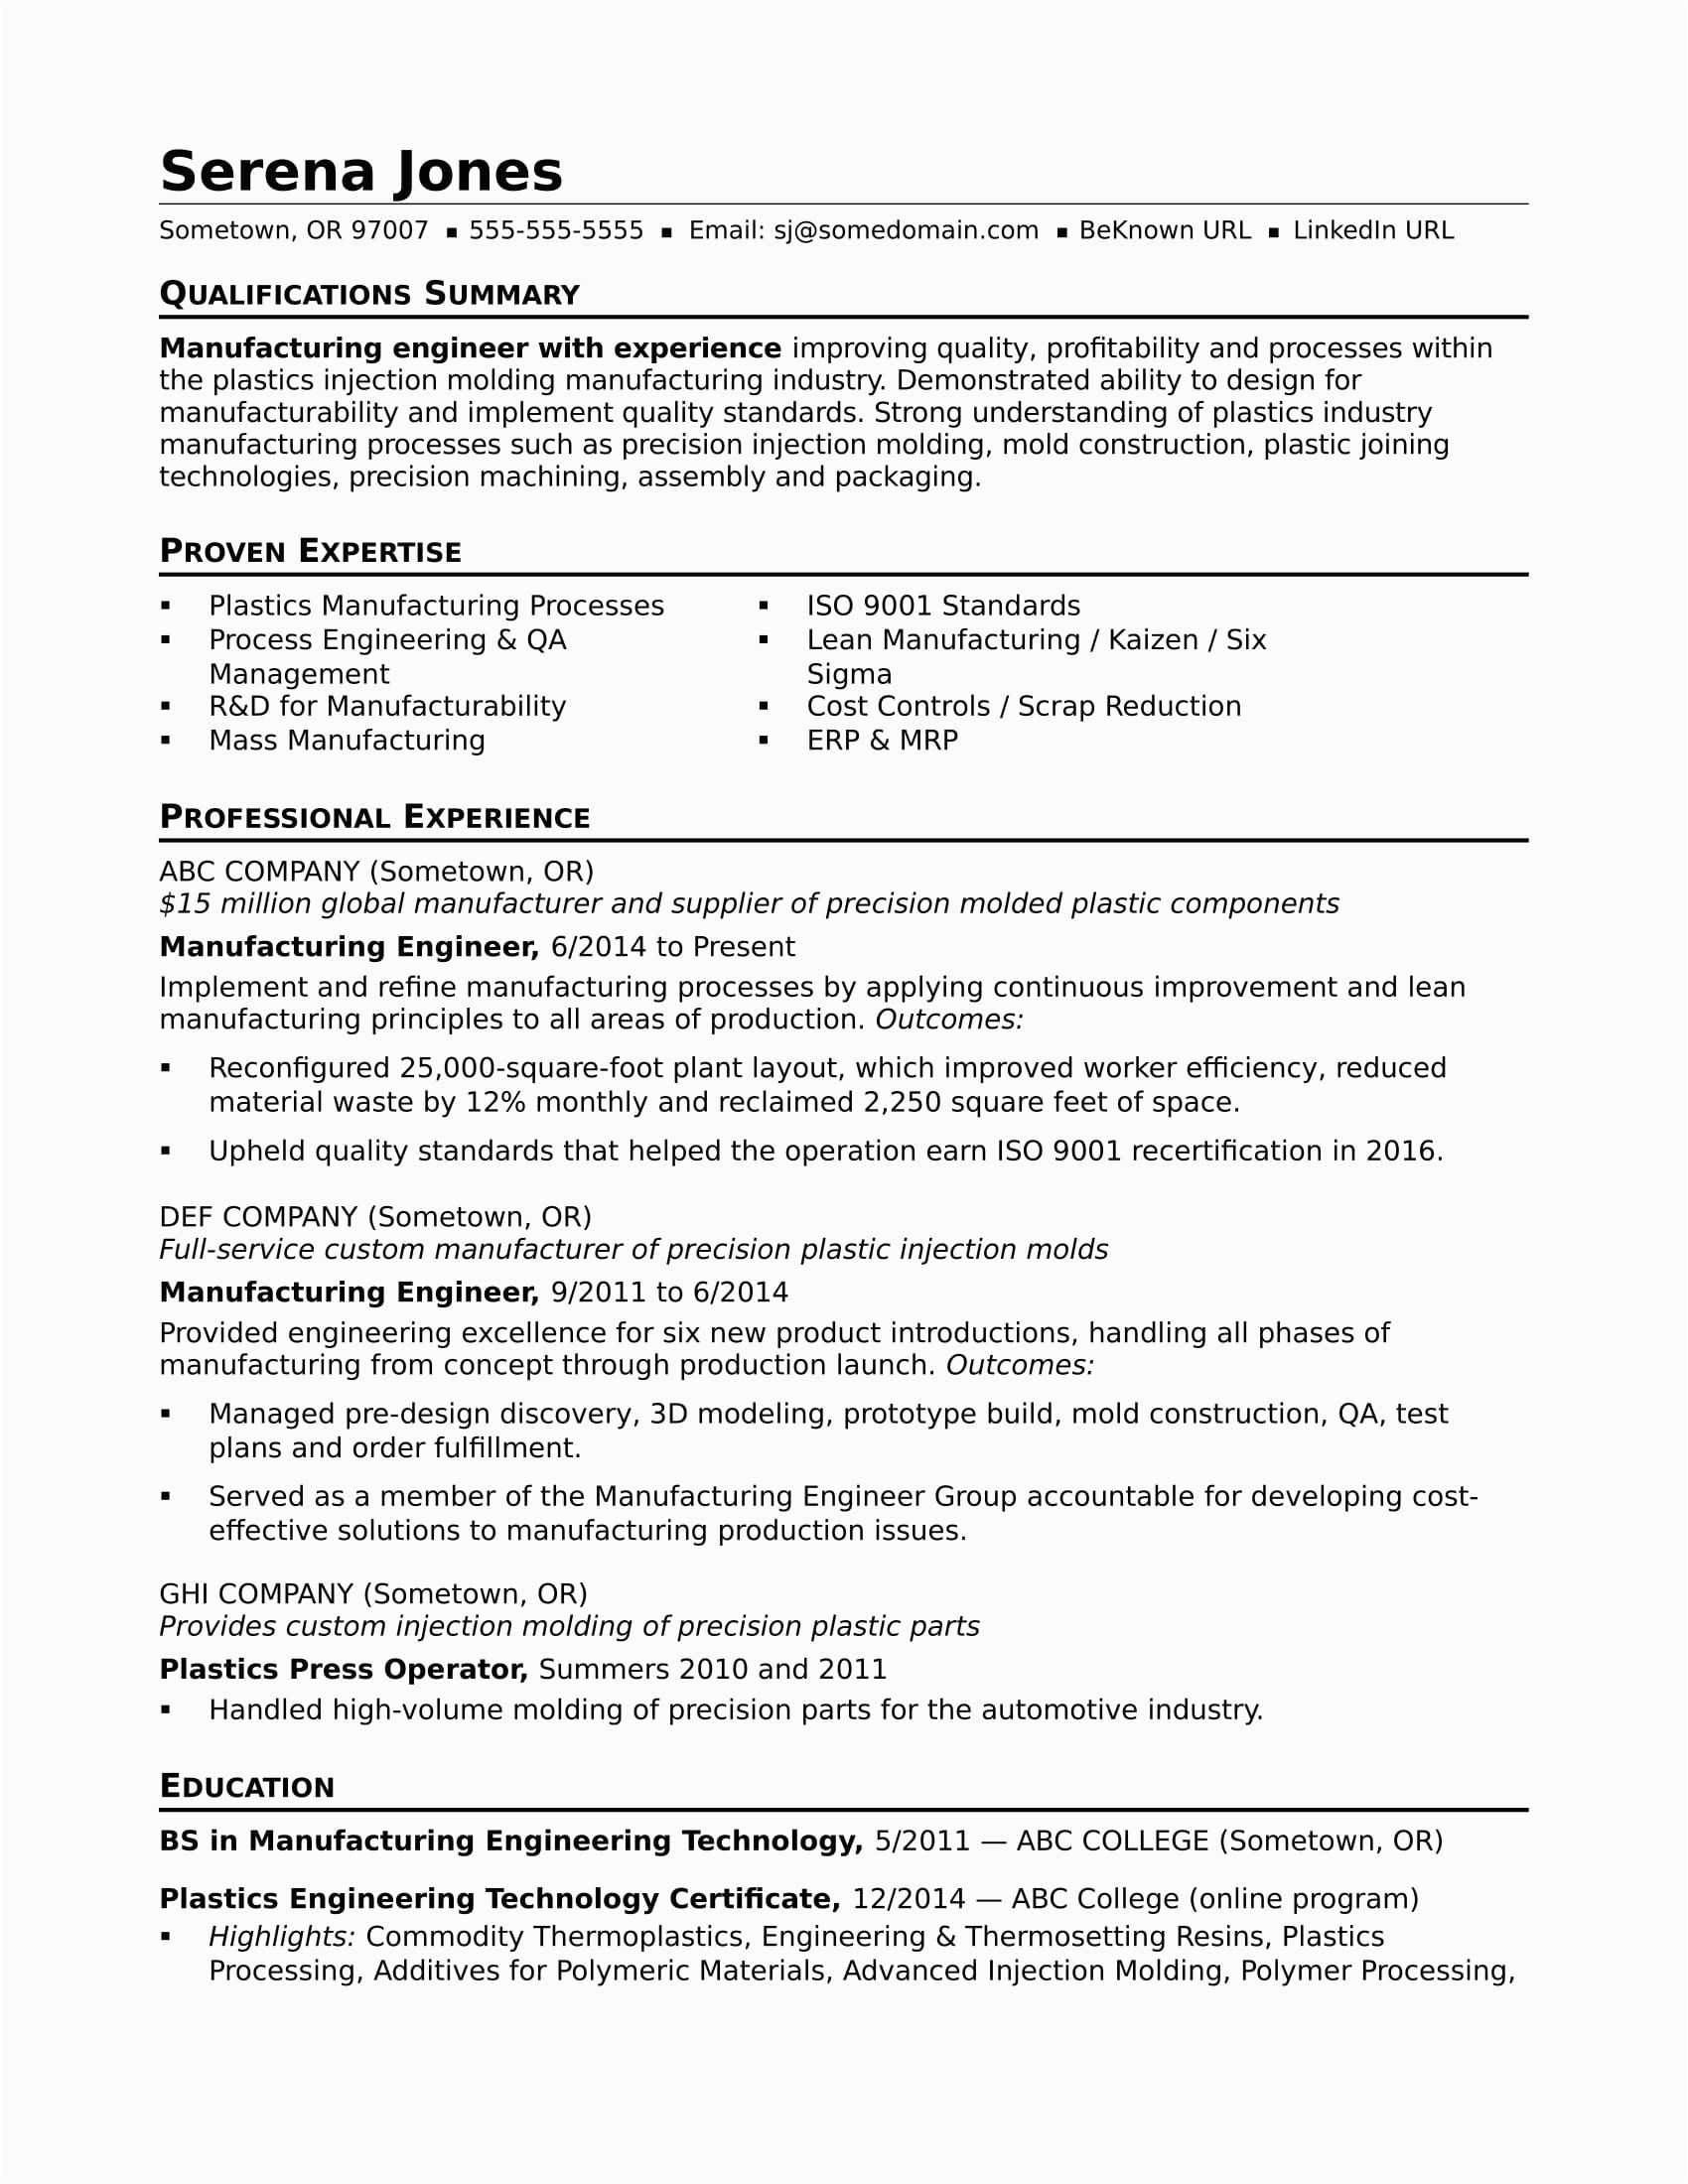 Manufacturing and Production Engineer Resume Samples Manufacturing Engineer Resume